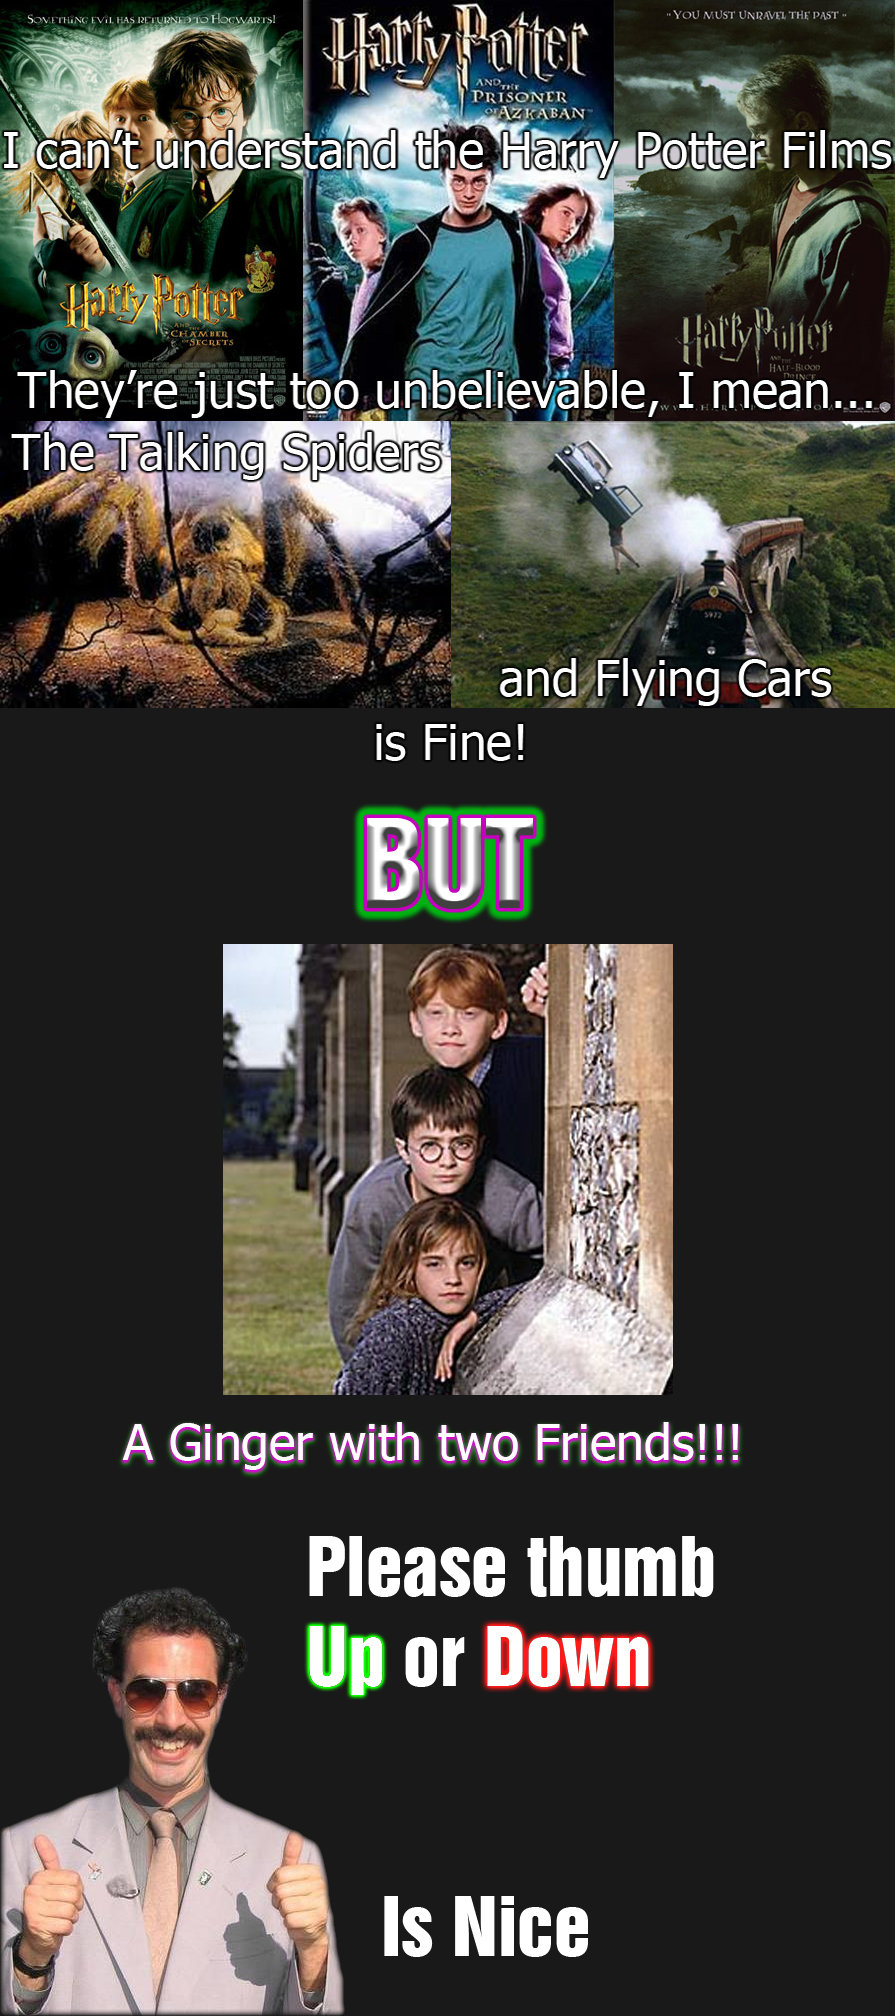 38 Harry Potter Jokes That Are So Bad, They're Good - ScoopWhoop